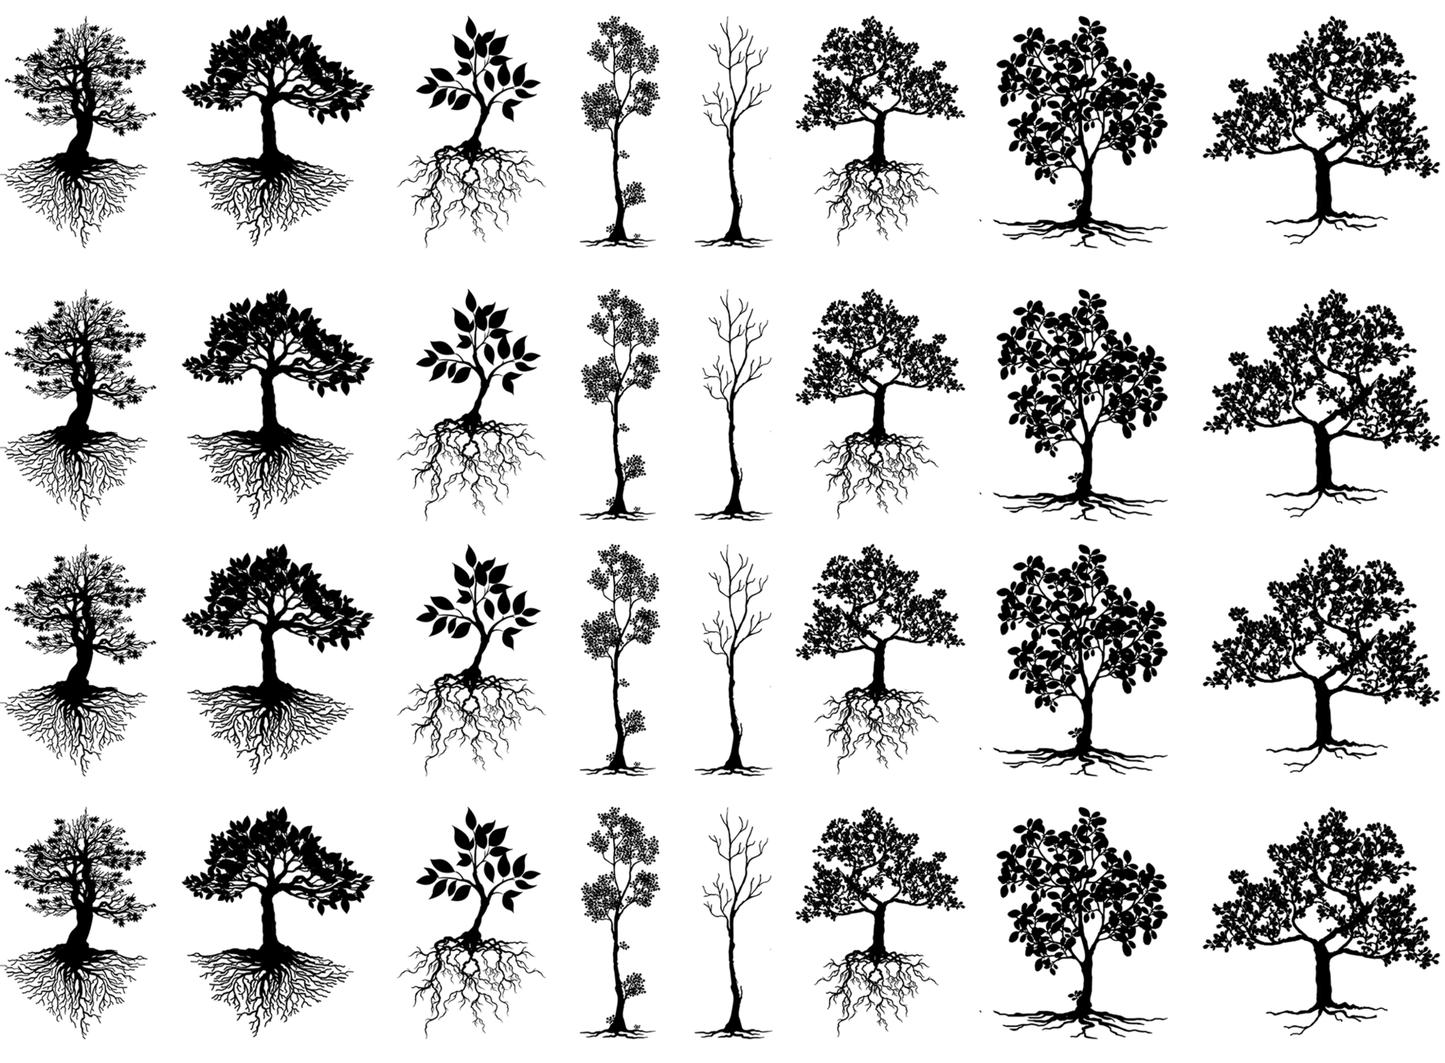 Trees 32 pcs 1" to 1-1/8" Black Fused Glass Decals